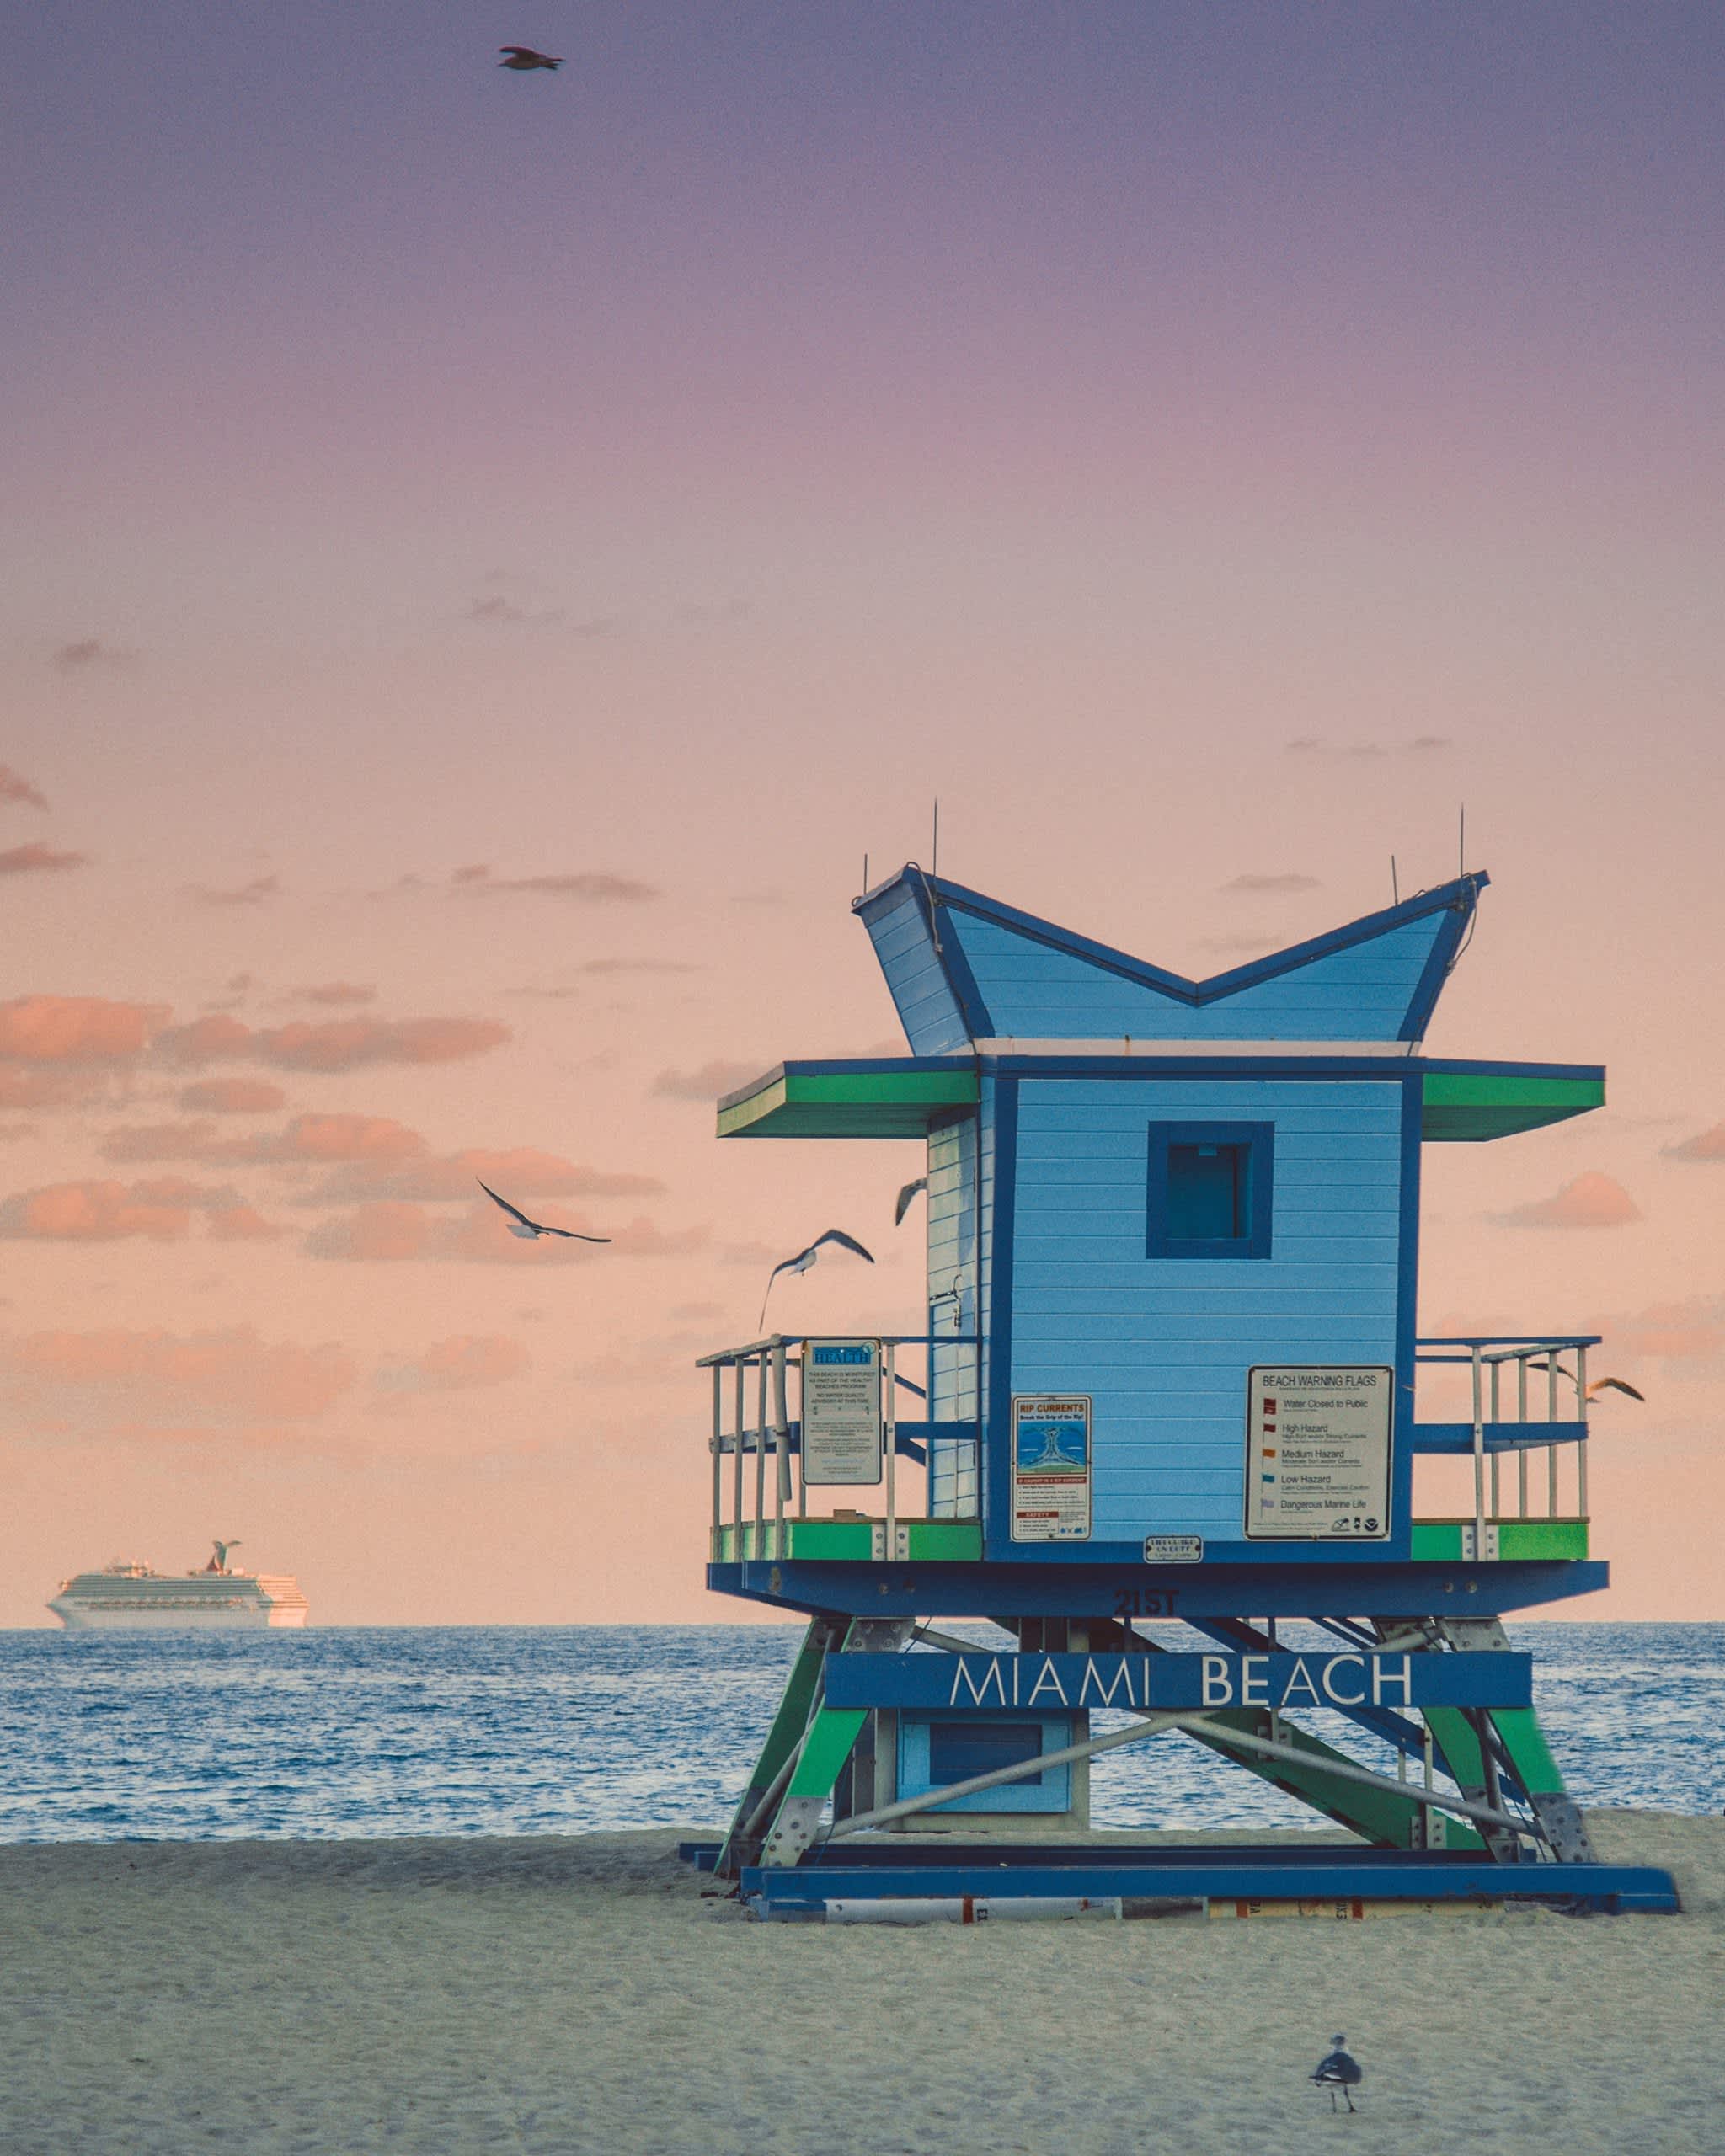 A lifeguard stand on famous Miami Beach